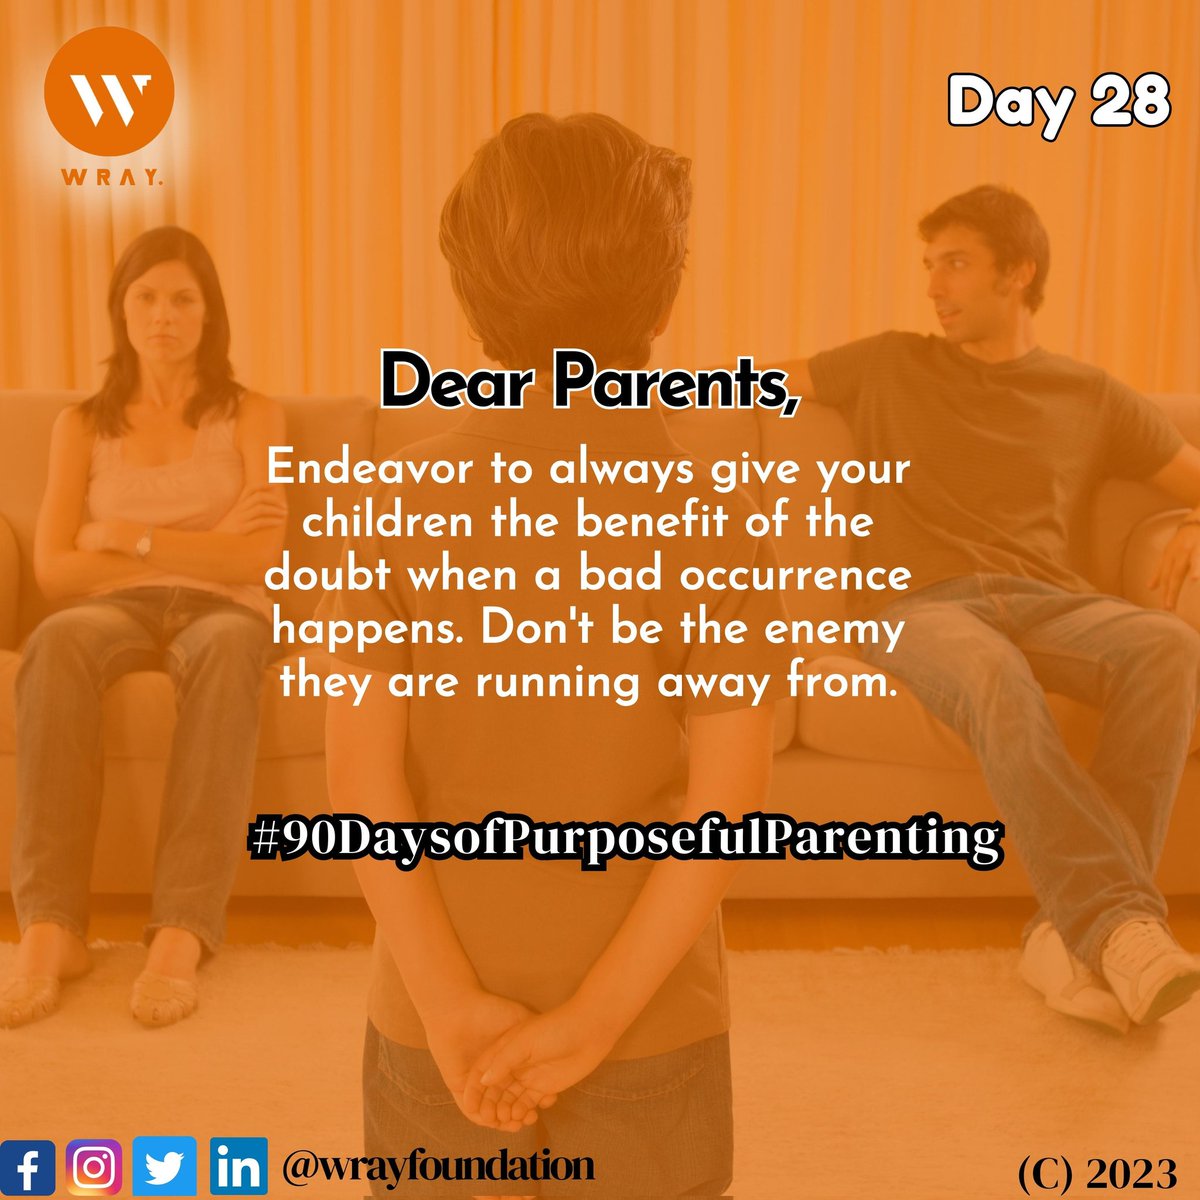 Day 28 of Parent Education Awareness 

#WRAYFoundation #ParentEducationCampaign #Day27 #EducatingParents #MakingADifference #90DaysOfPurposefulParenting #ValueYourChildren #ParentalSupport #DiscoverYourPotentials #Teenagers #Youths #Counselling #Mentorship #Purpose #NGO